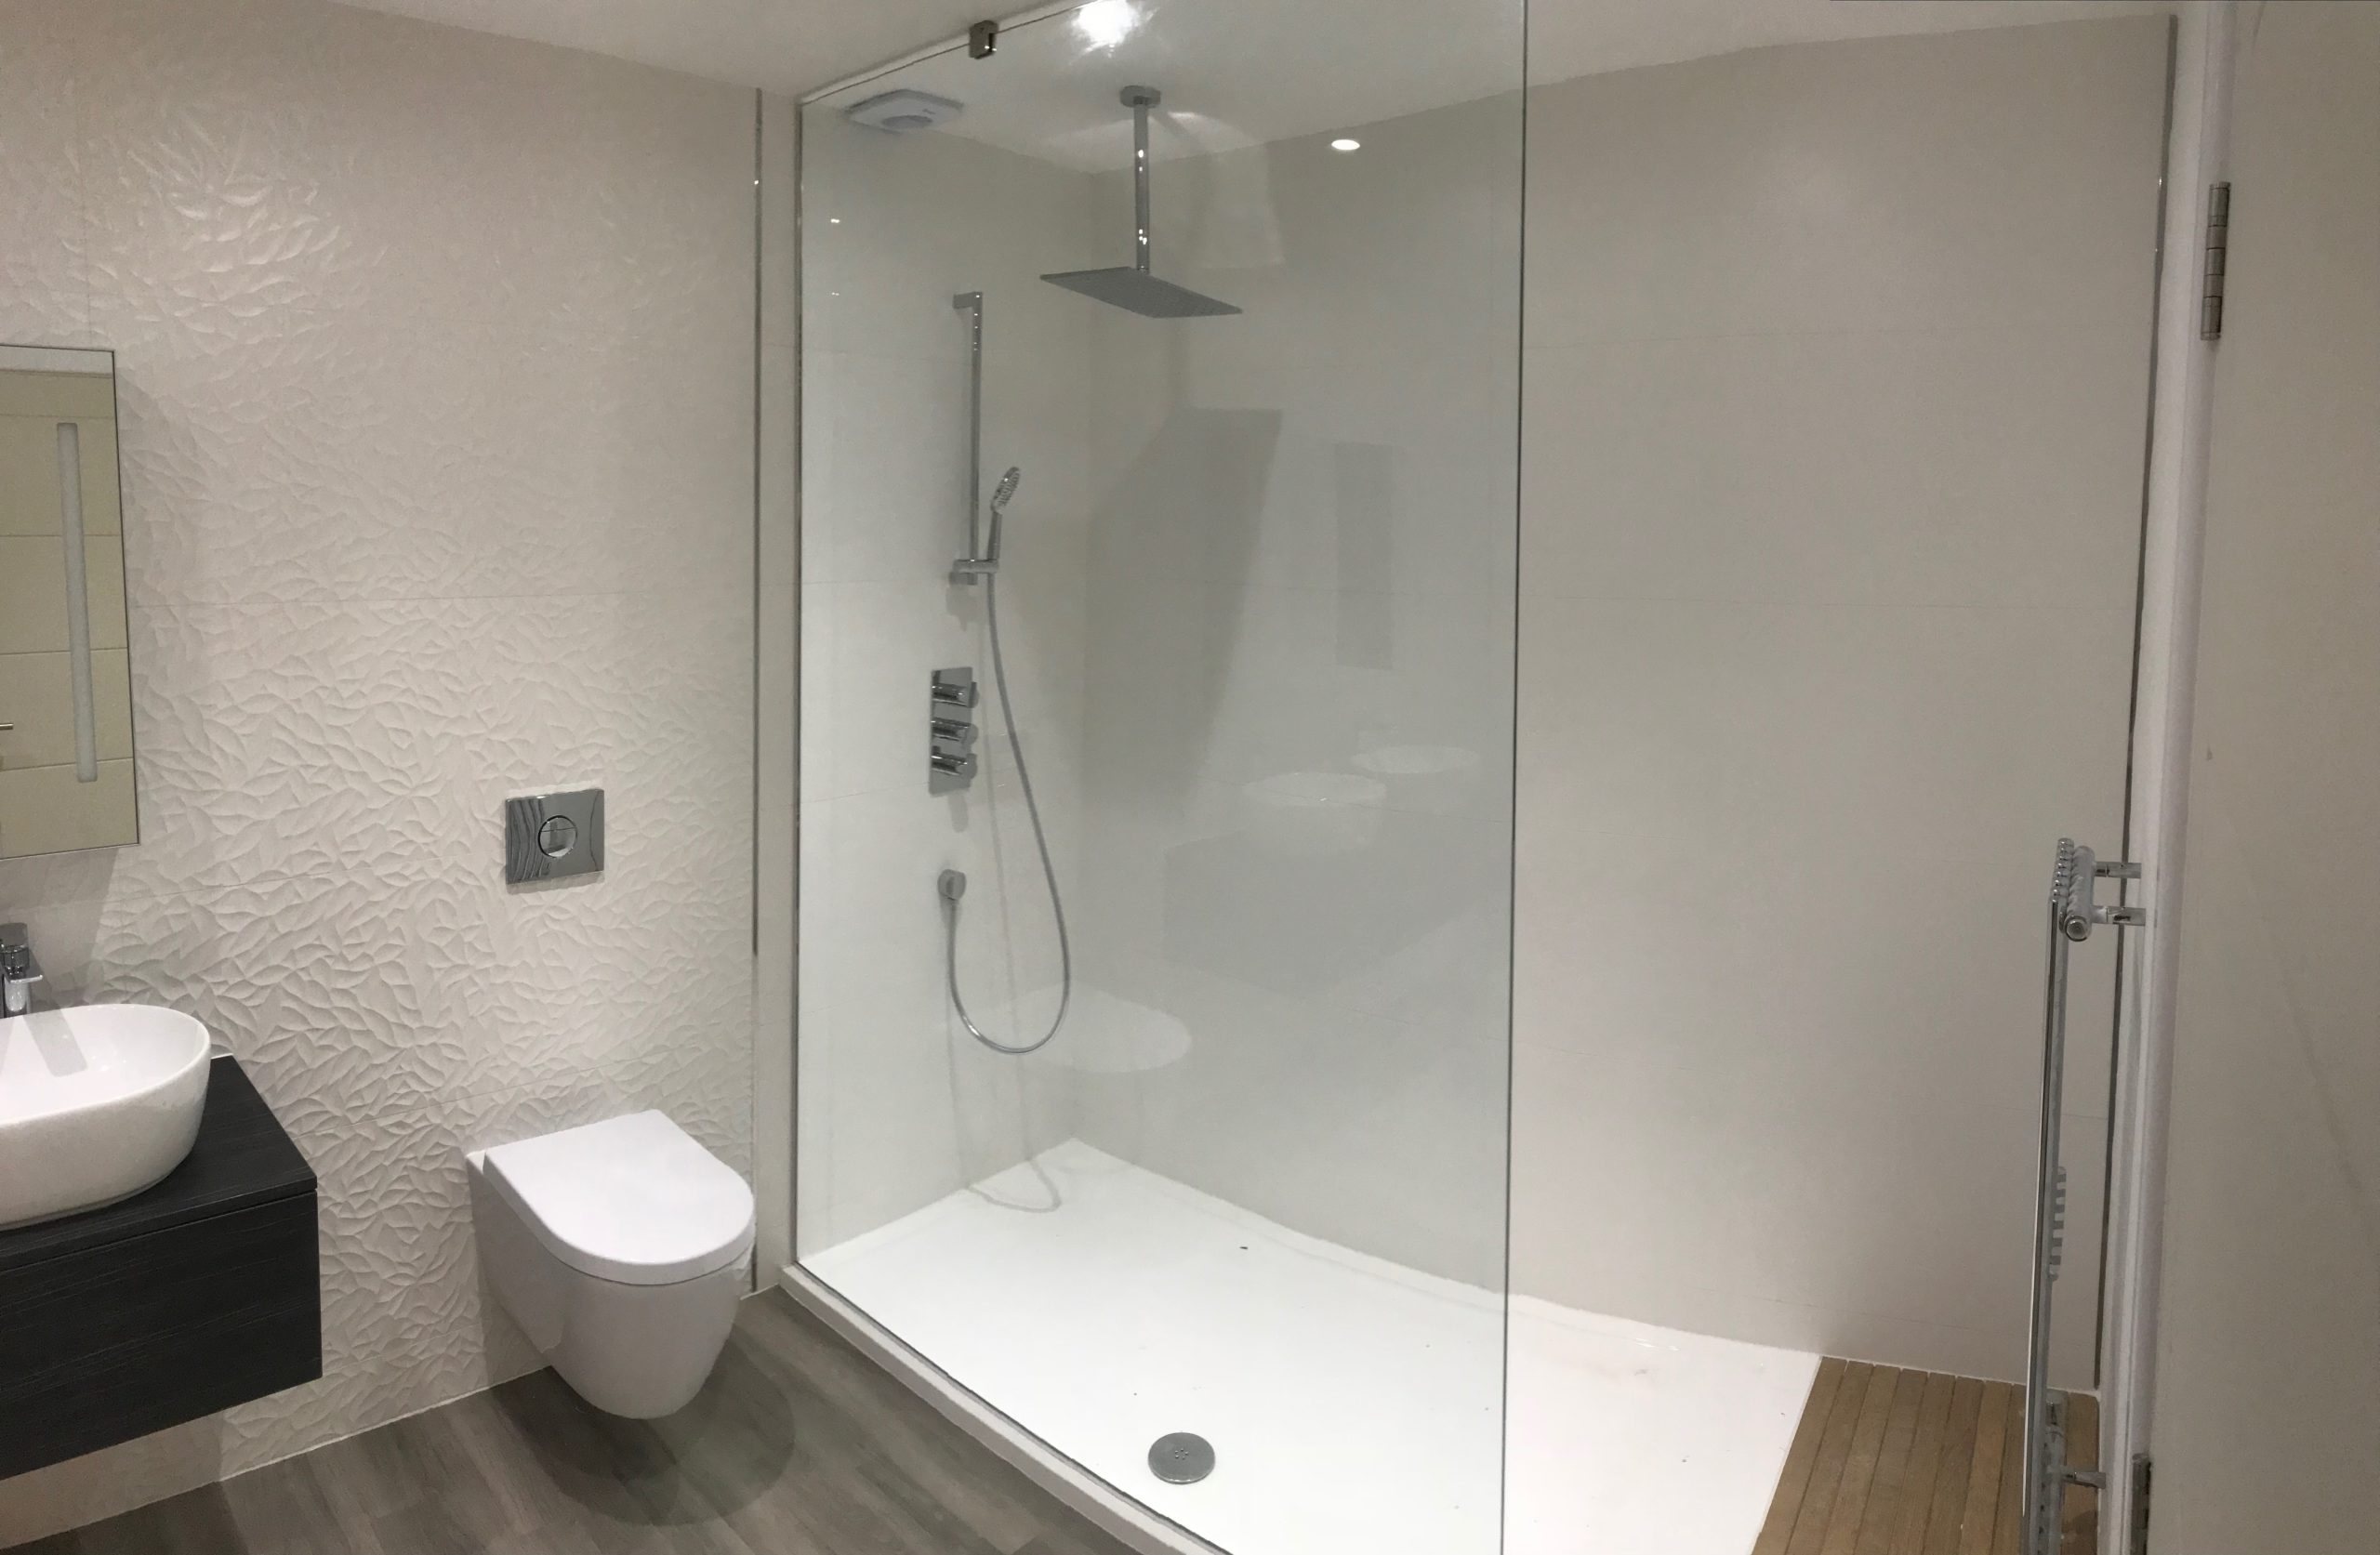 Modern bathroom having glass shower enclosure with white tray